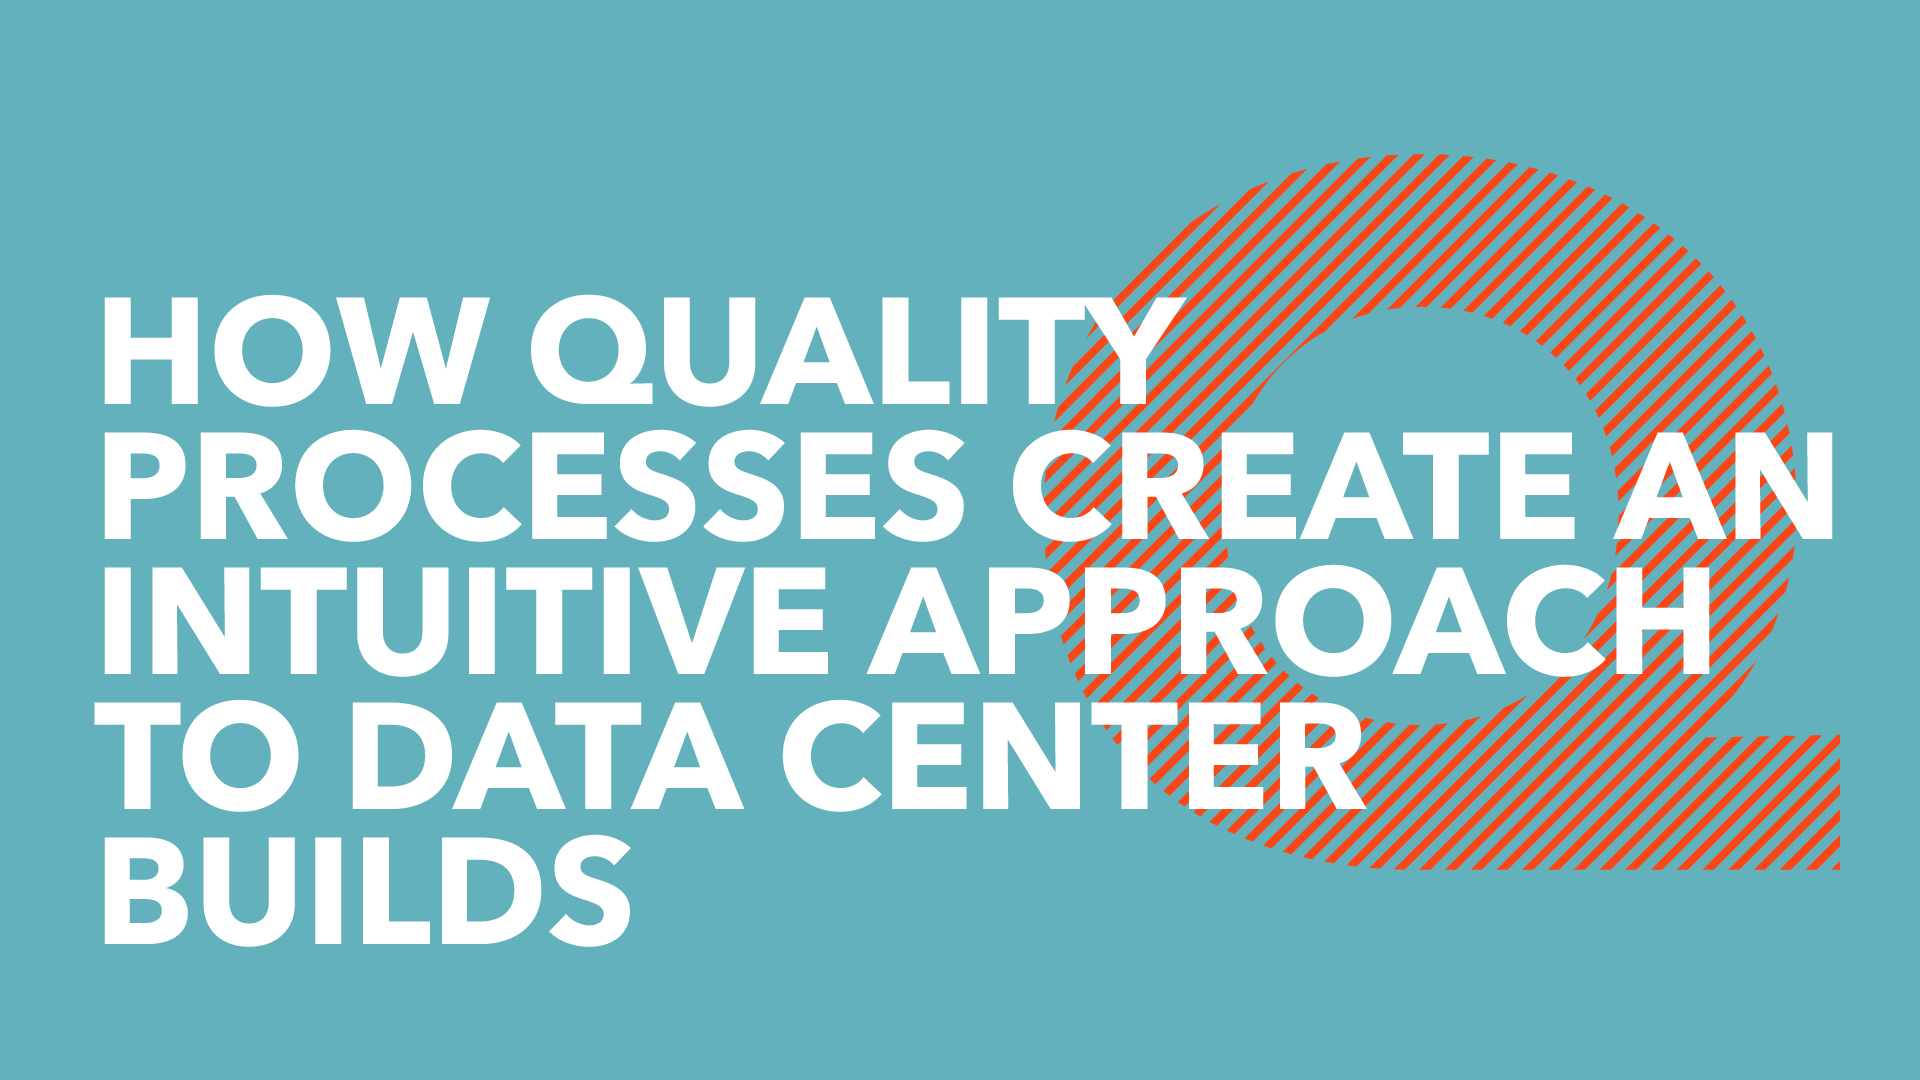 How quality processes create an intuitive approach to data center builds